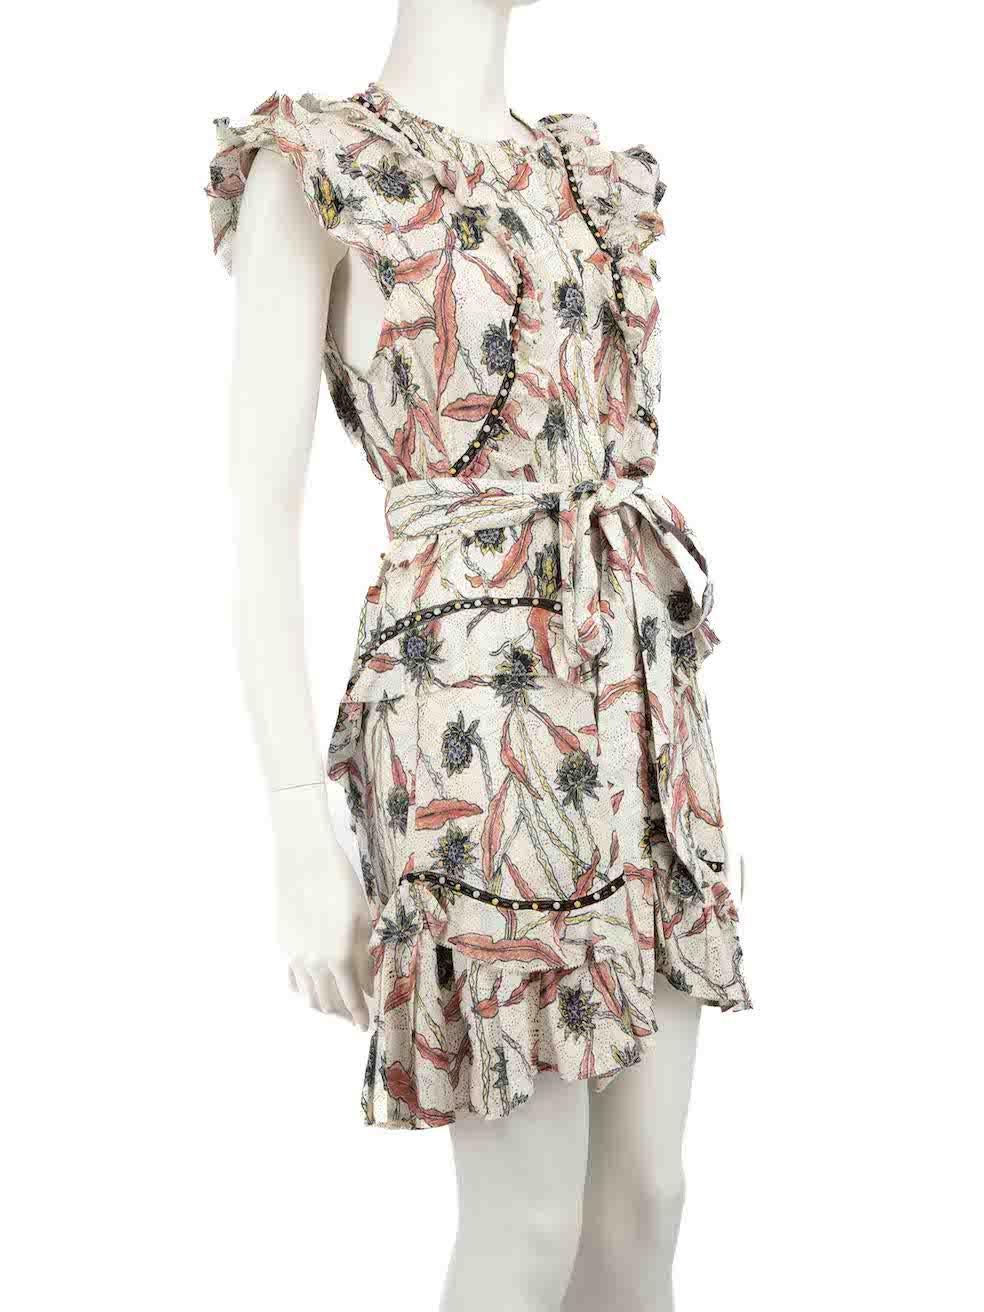 CONDITION is Very good. Hardly any visible wear to dress is evident on this used Isabel Marant designer resale item.
 
 
 
 Details
 
 
 Multicolour
 
 Cotton
 
 Sleeveless dress
 
 Mini length
 
 Round neckline
 
 Floral patterned
 
 Studded and